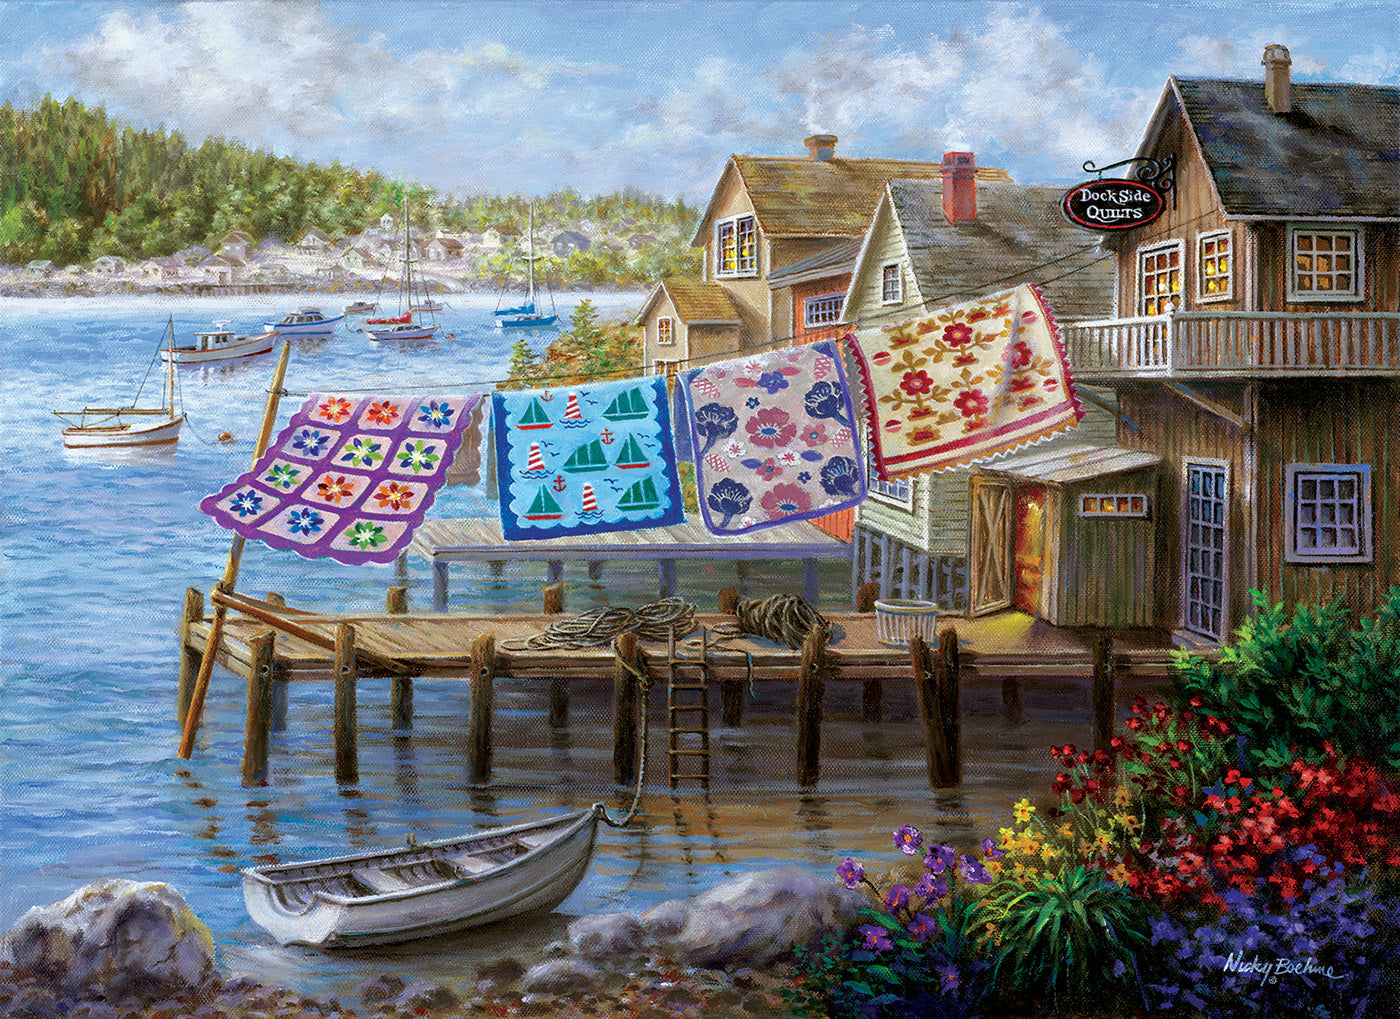 Dockside Quilts - 500 Large Piece Jigsaw Puzzle